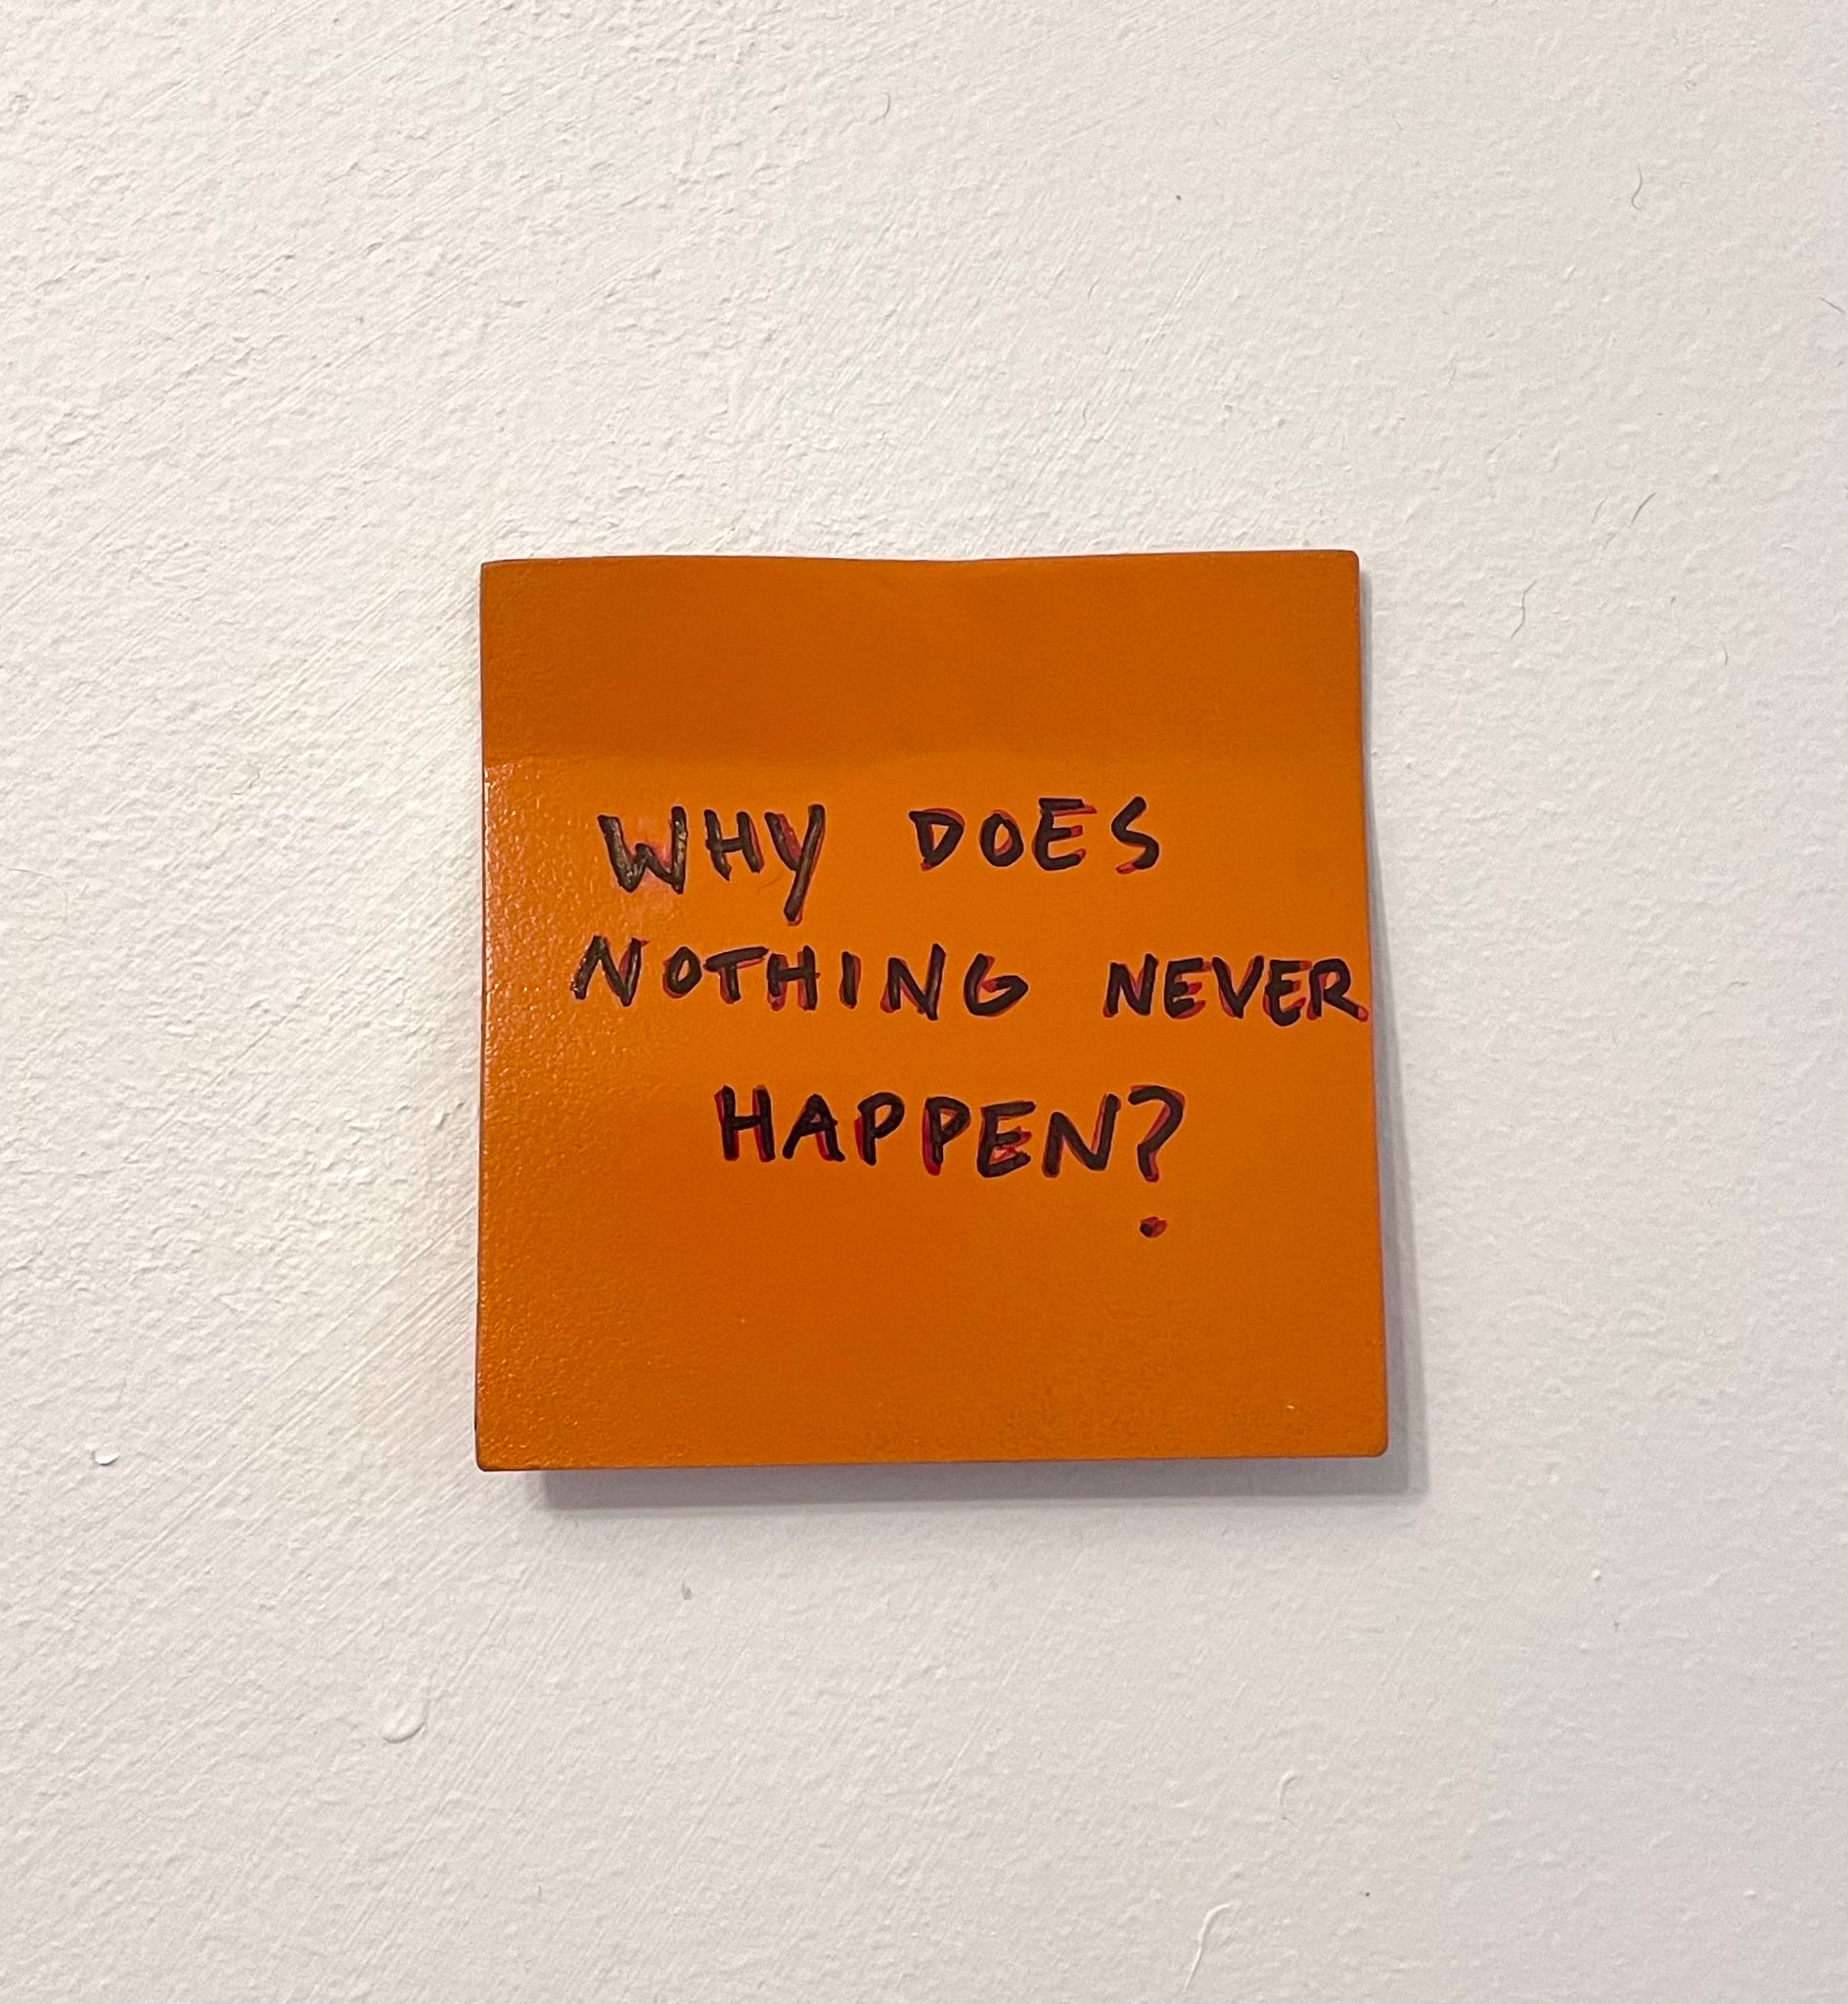 Stuart Lantry, " Why does nothing never happen?"